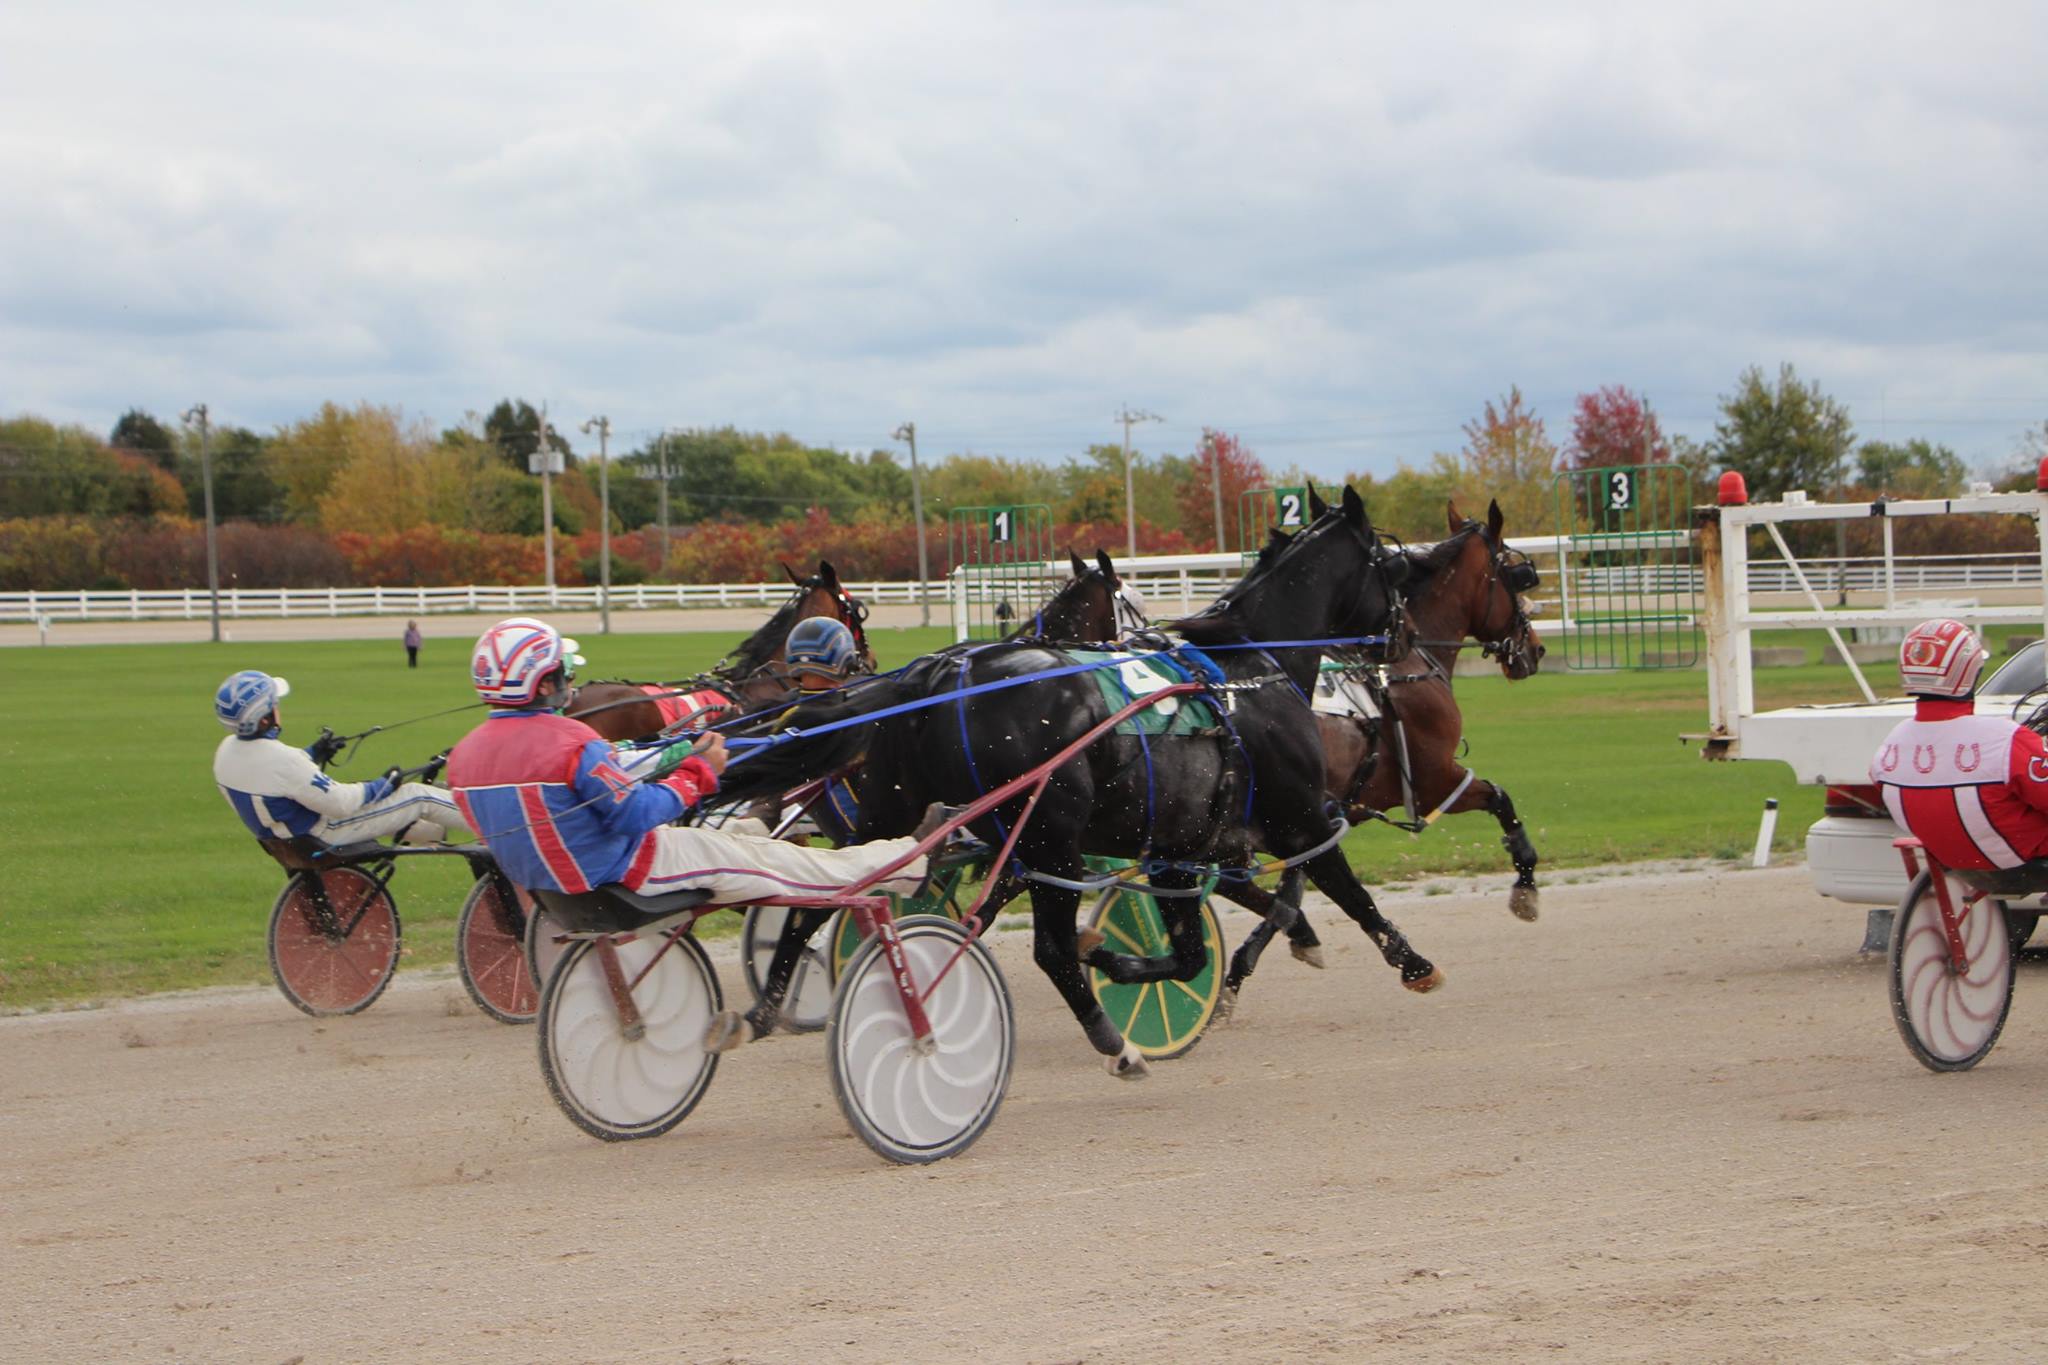 Bain vs. Barnsdale: Labour Day Breakaway in Leamington Raceway Handicapping Challenge